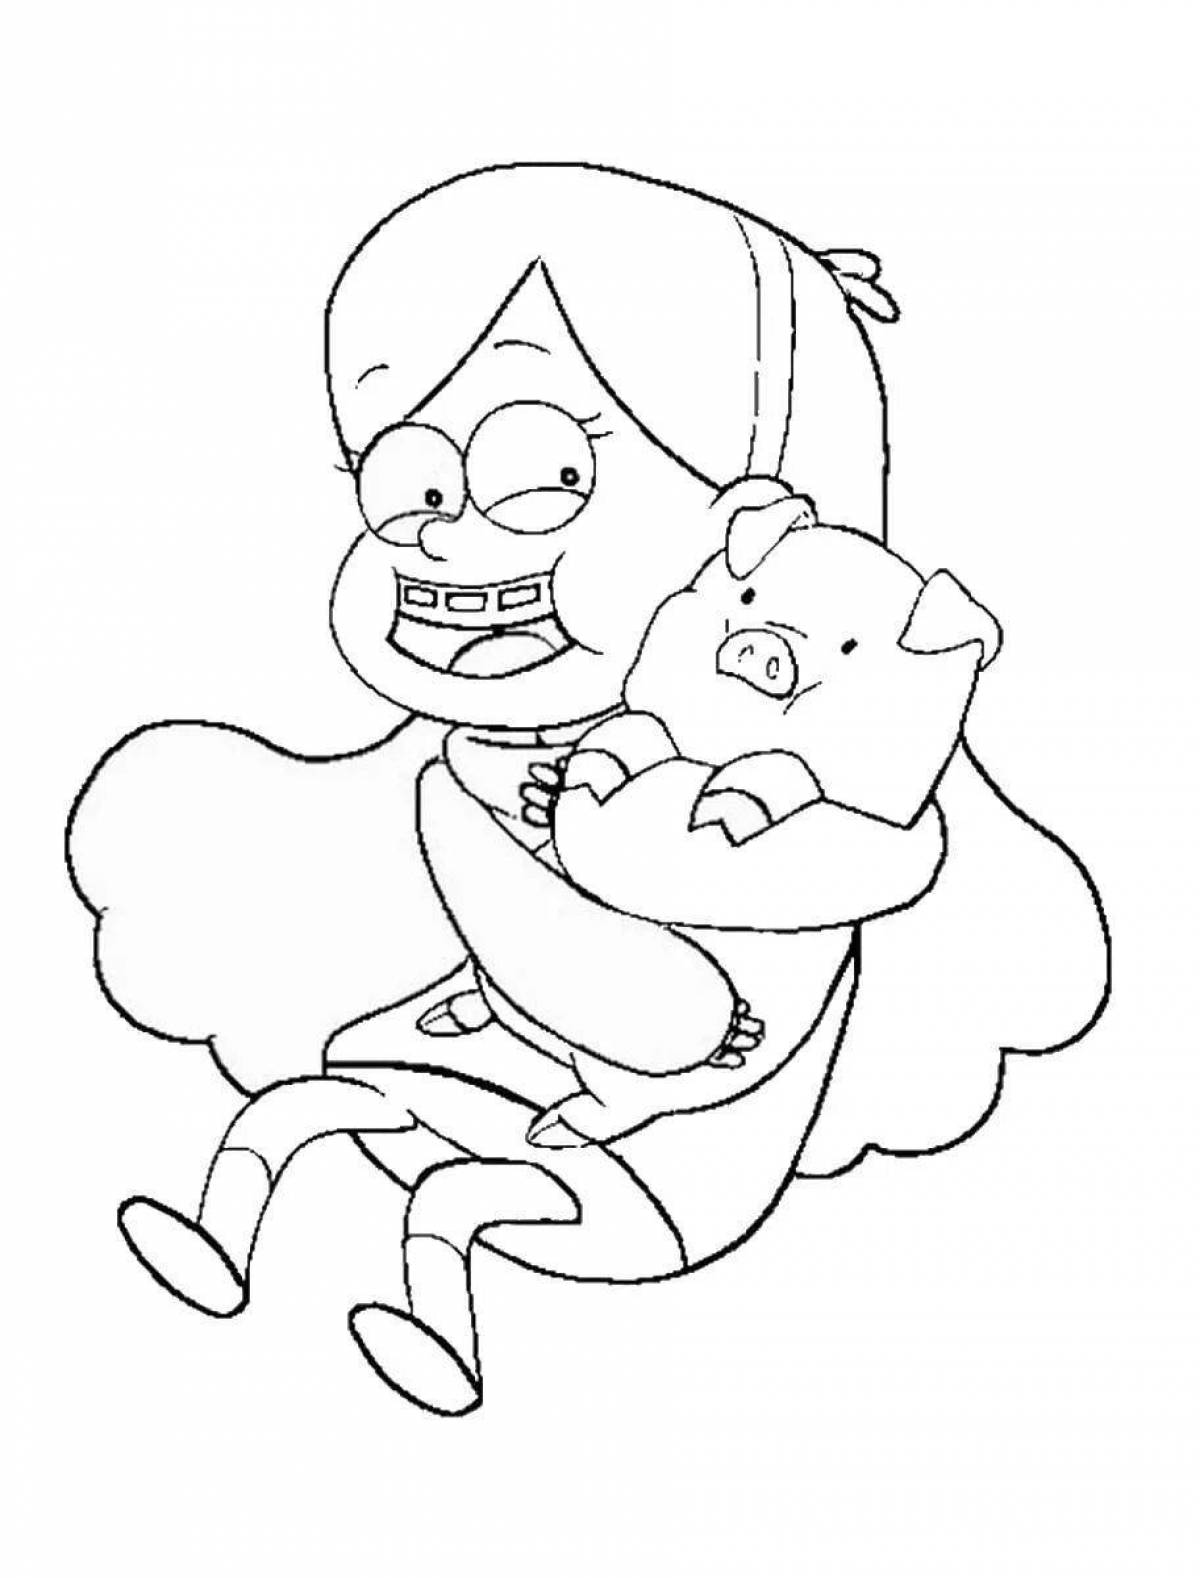 Mysterious gravity falls coloring page